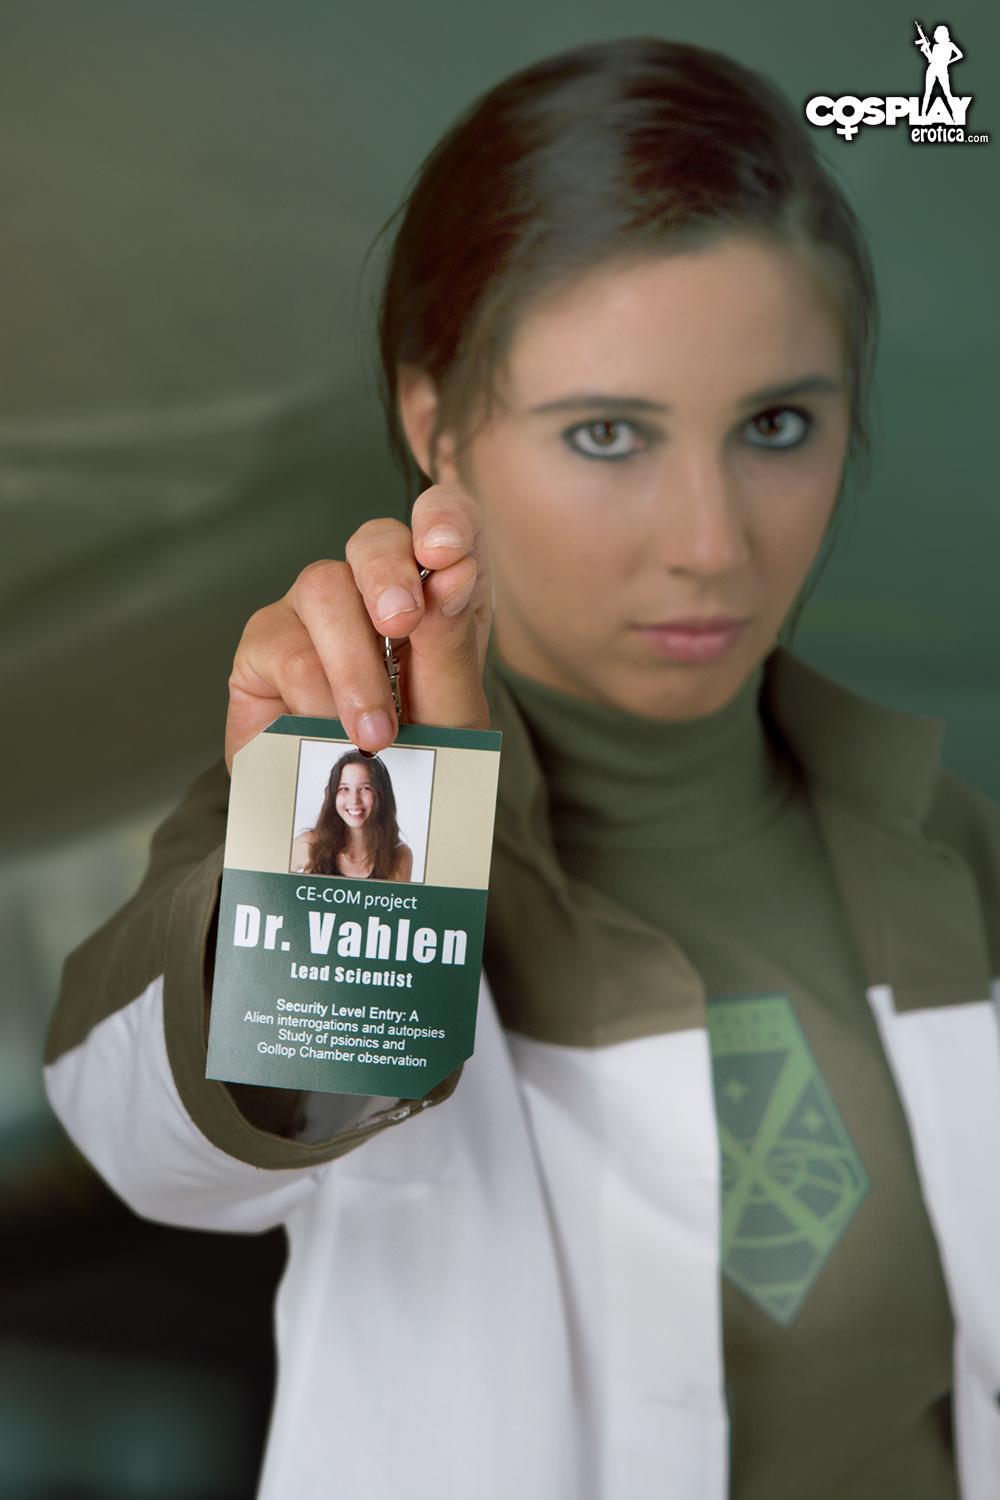 Beautiful cosplayer Stacy dresses up as Dr. Vahlen from X-Com #60007914